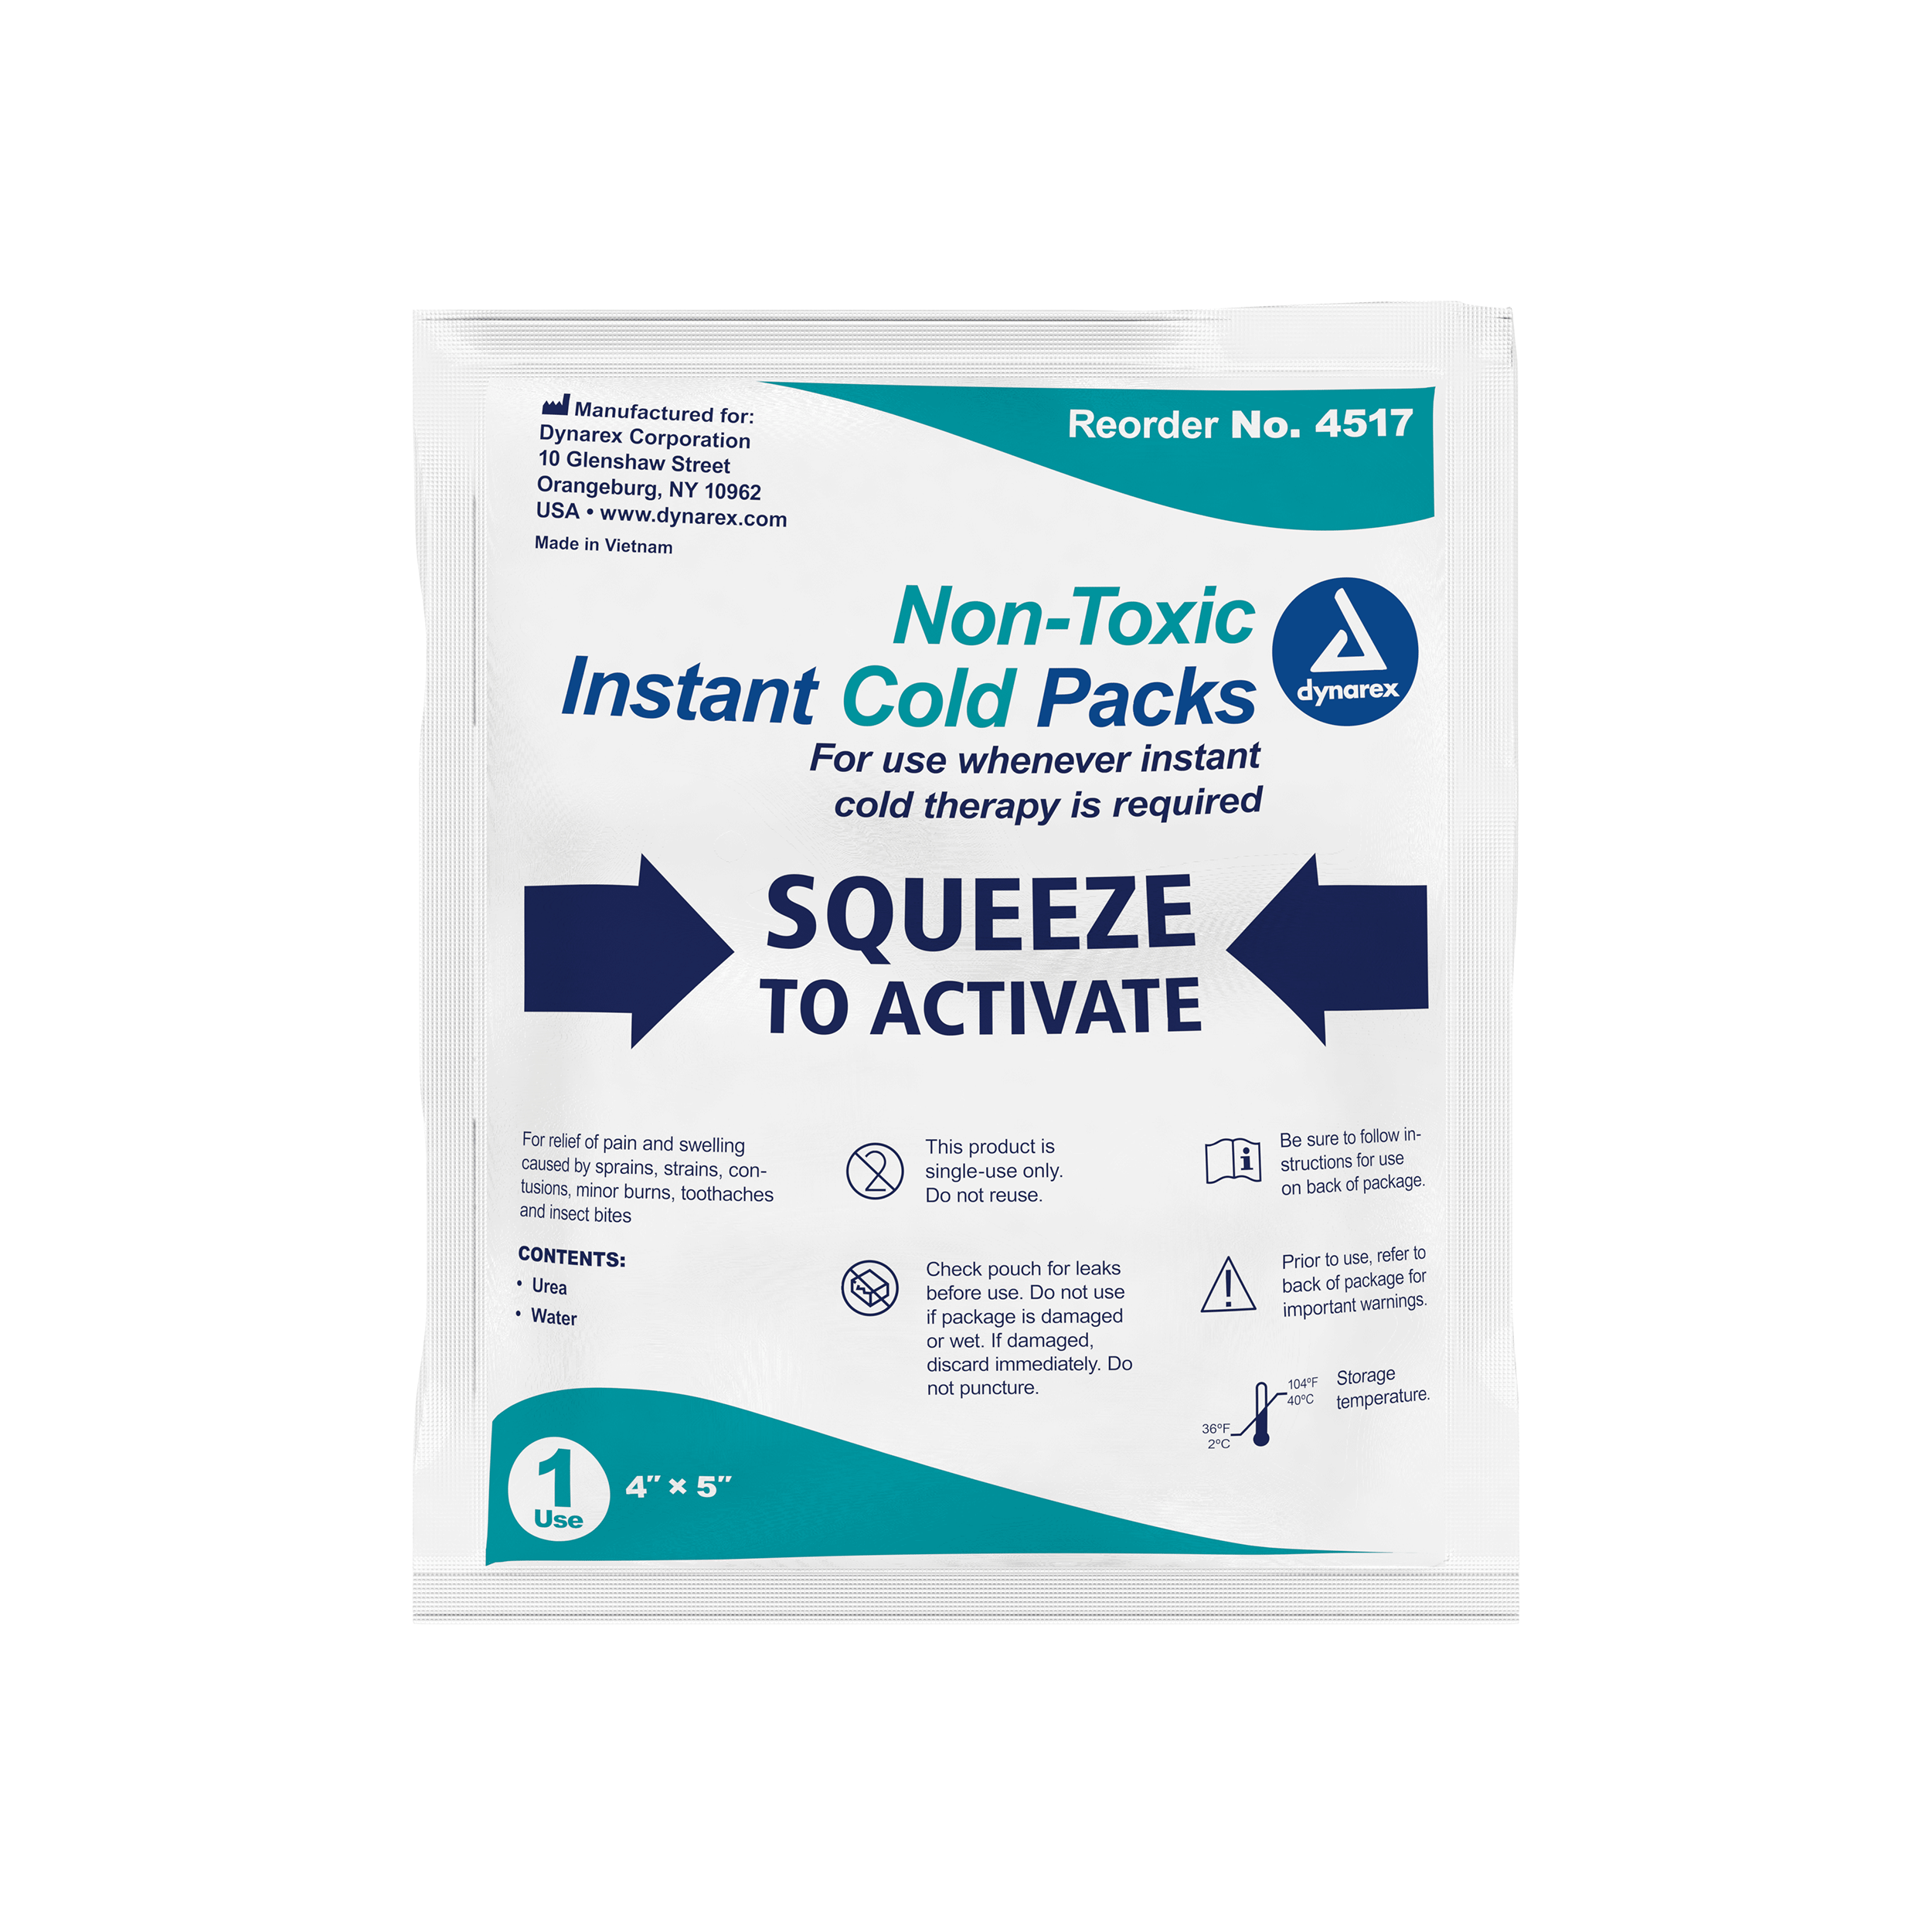 Instant Cold Pack with Urea (Non-Toxic), 4 x 5